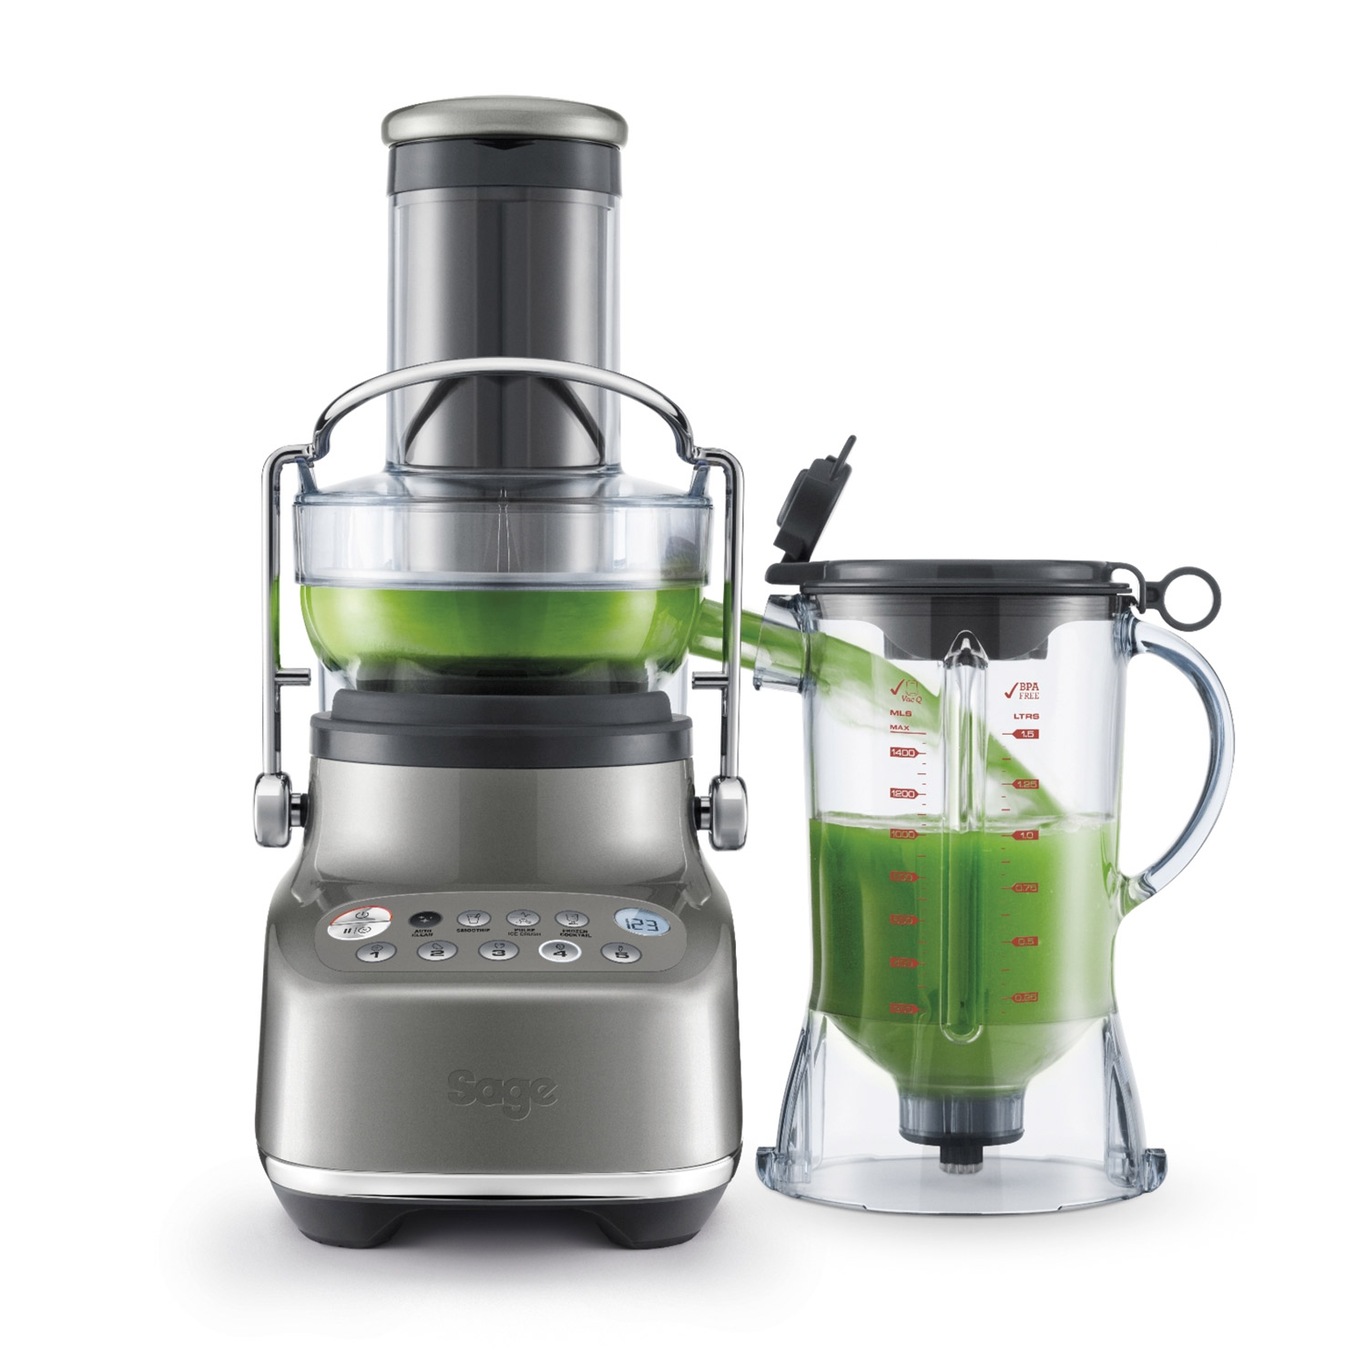 The 3x Bluicer Blender SJB 615 SHY, Smoked Hickory